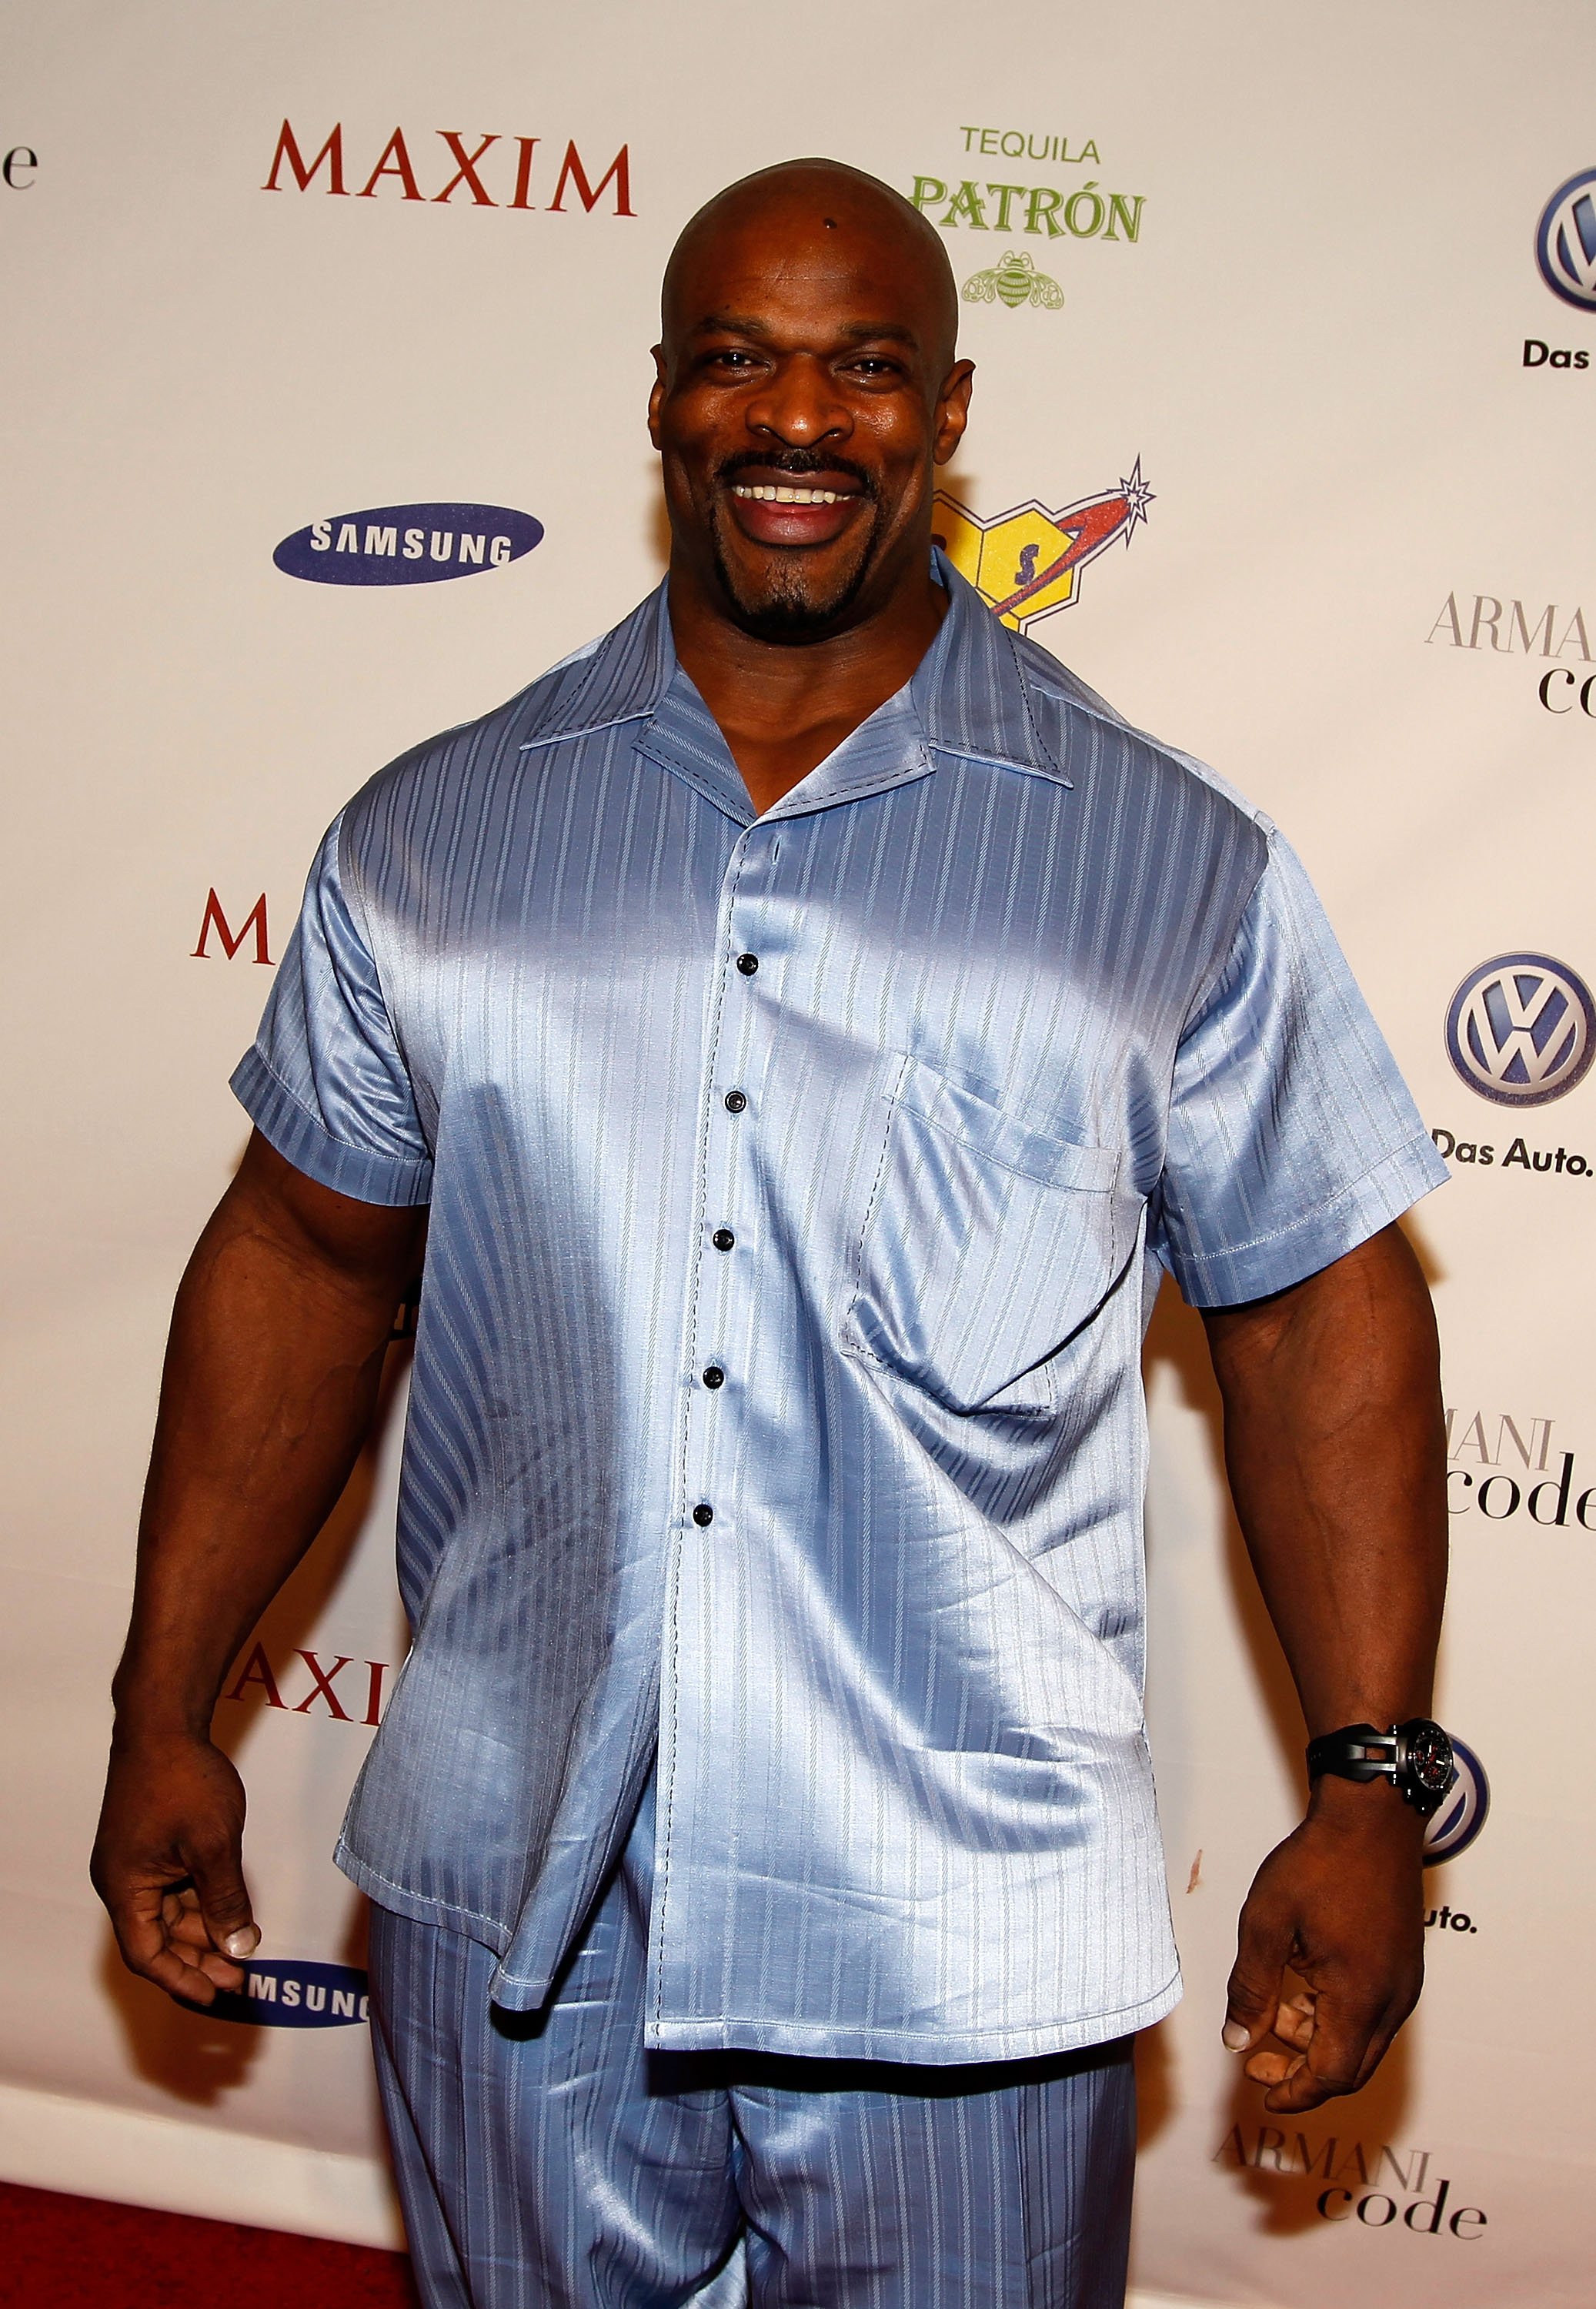 Ronnie Coleman at the 2010 Maxim Party on February 6, 2010 | Source: Getty Images